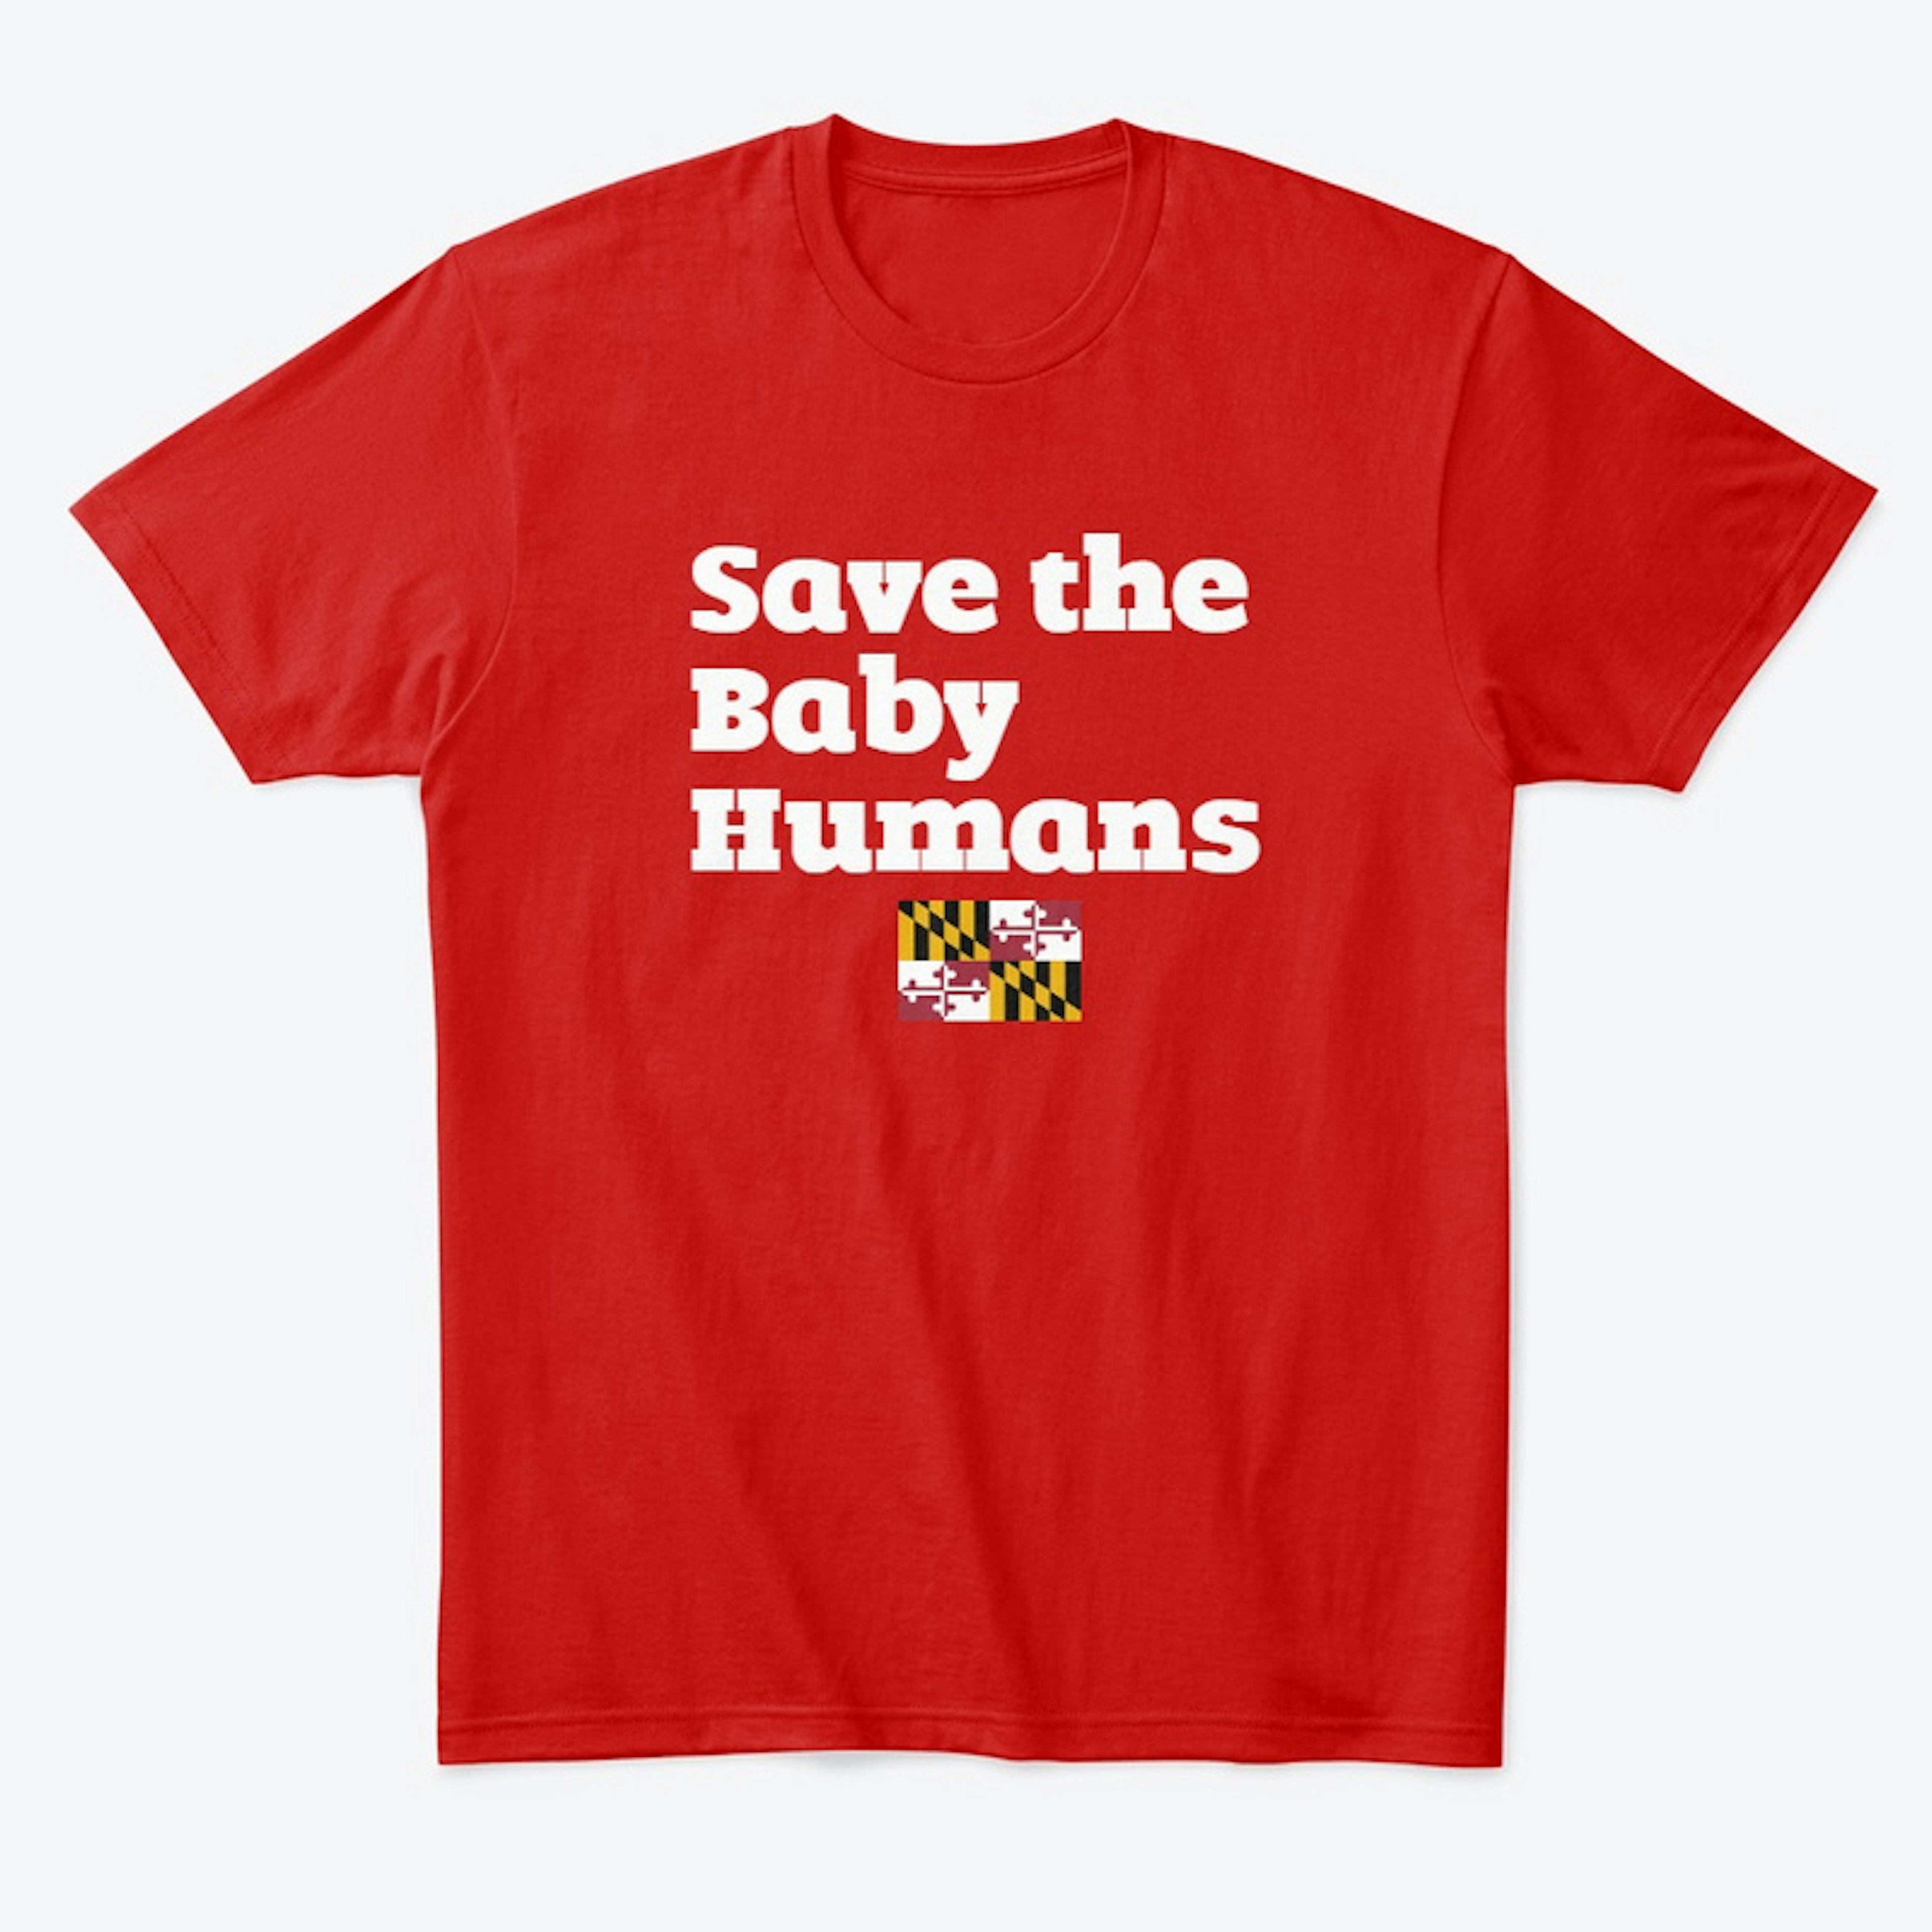 Save the Baby Humans